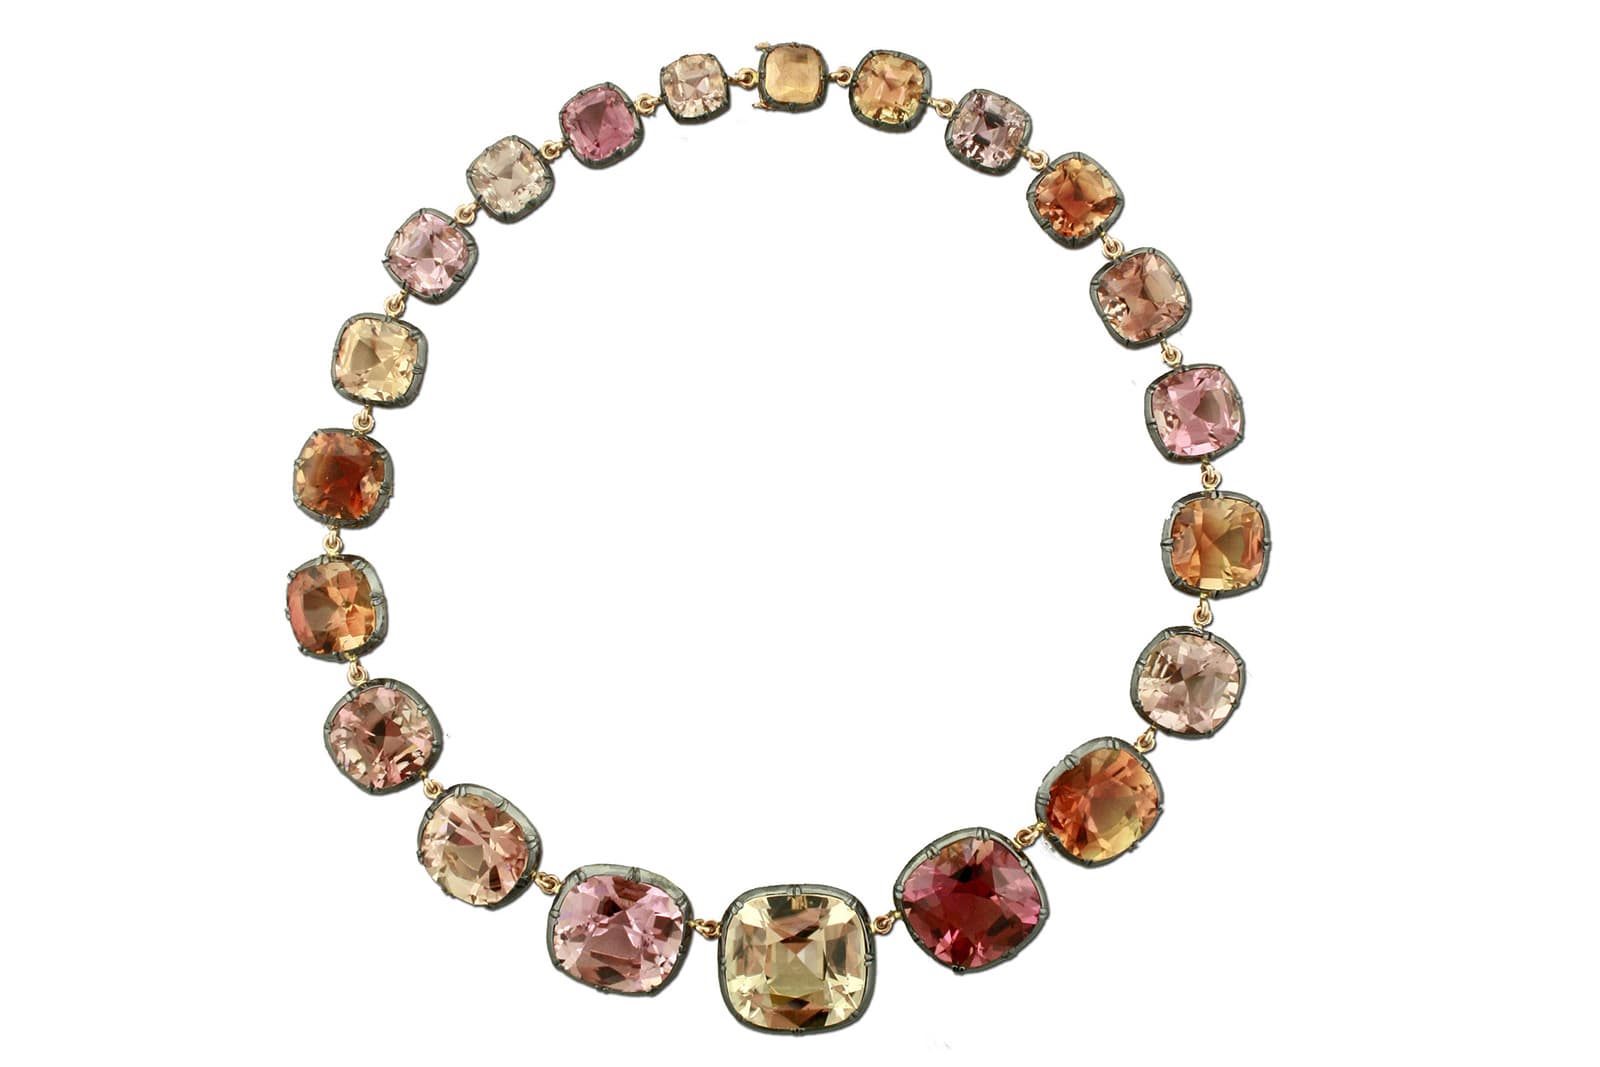 Taffin riviere necklace with tourmaline in silver and rose gold